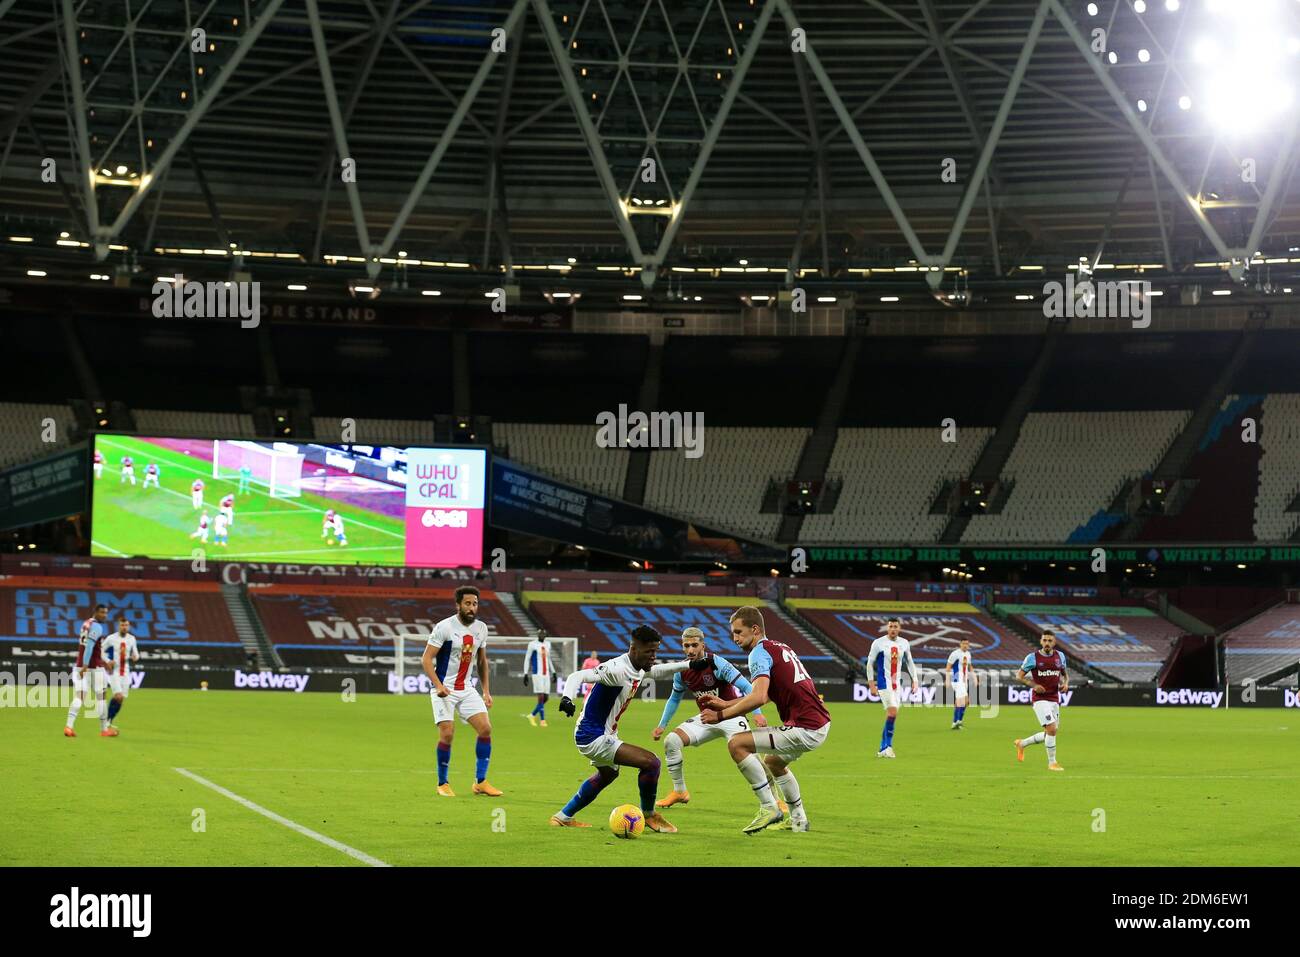 Action in front of empty stadium during the Premier League match at the London Stadium. Stock Photo